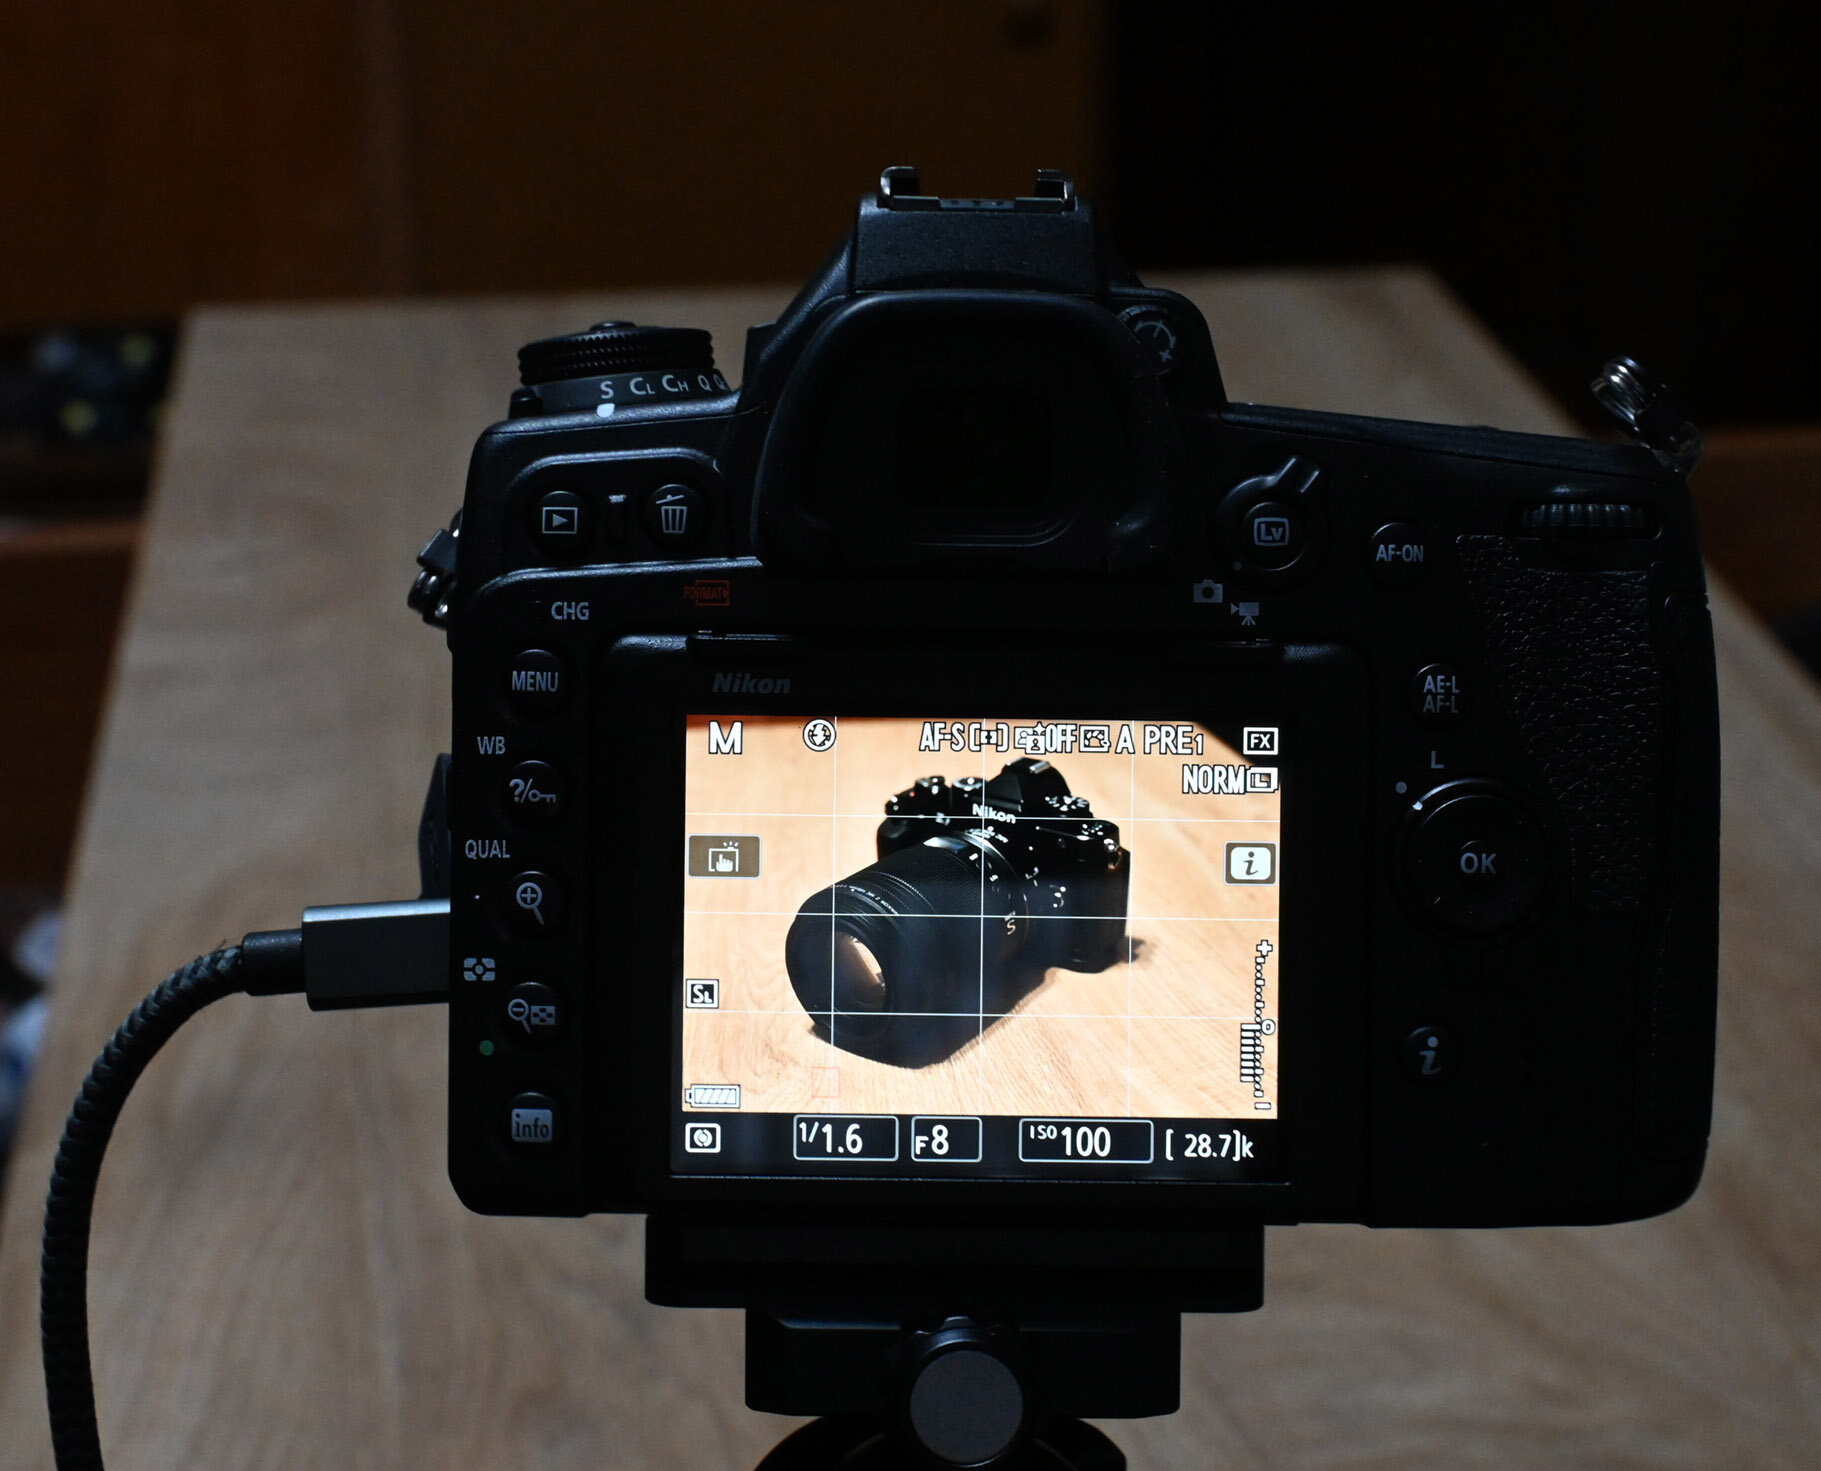 More information about "Nikon D780 : focus stacking via Helicon Remote"